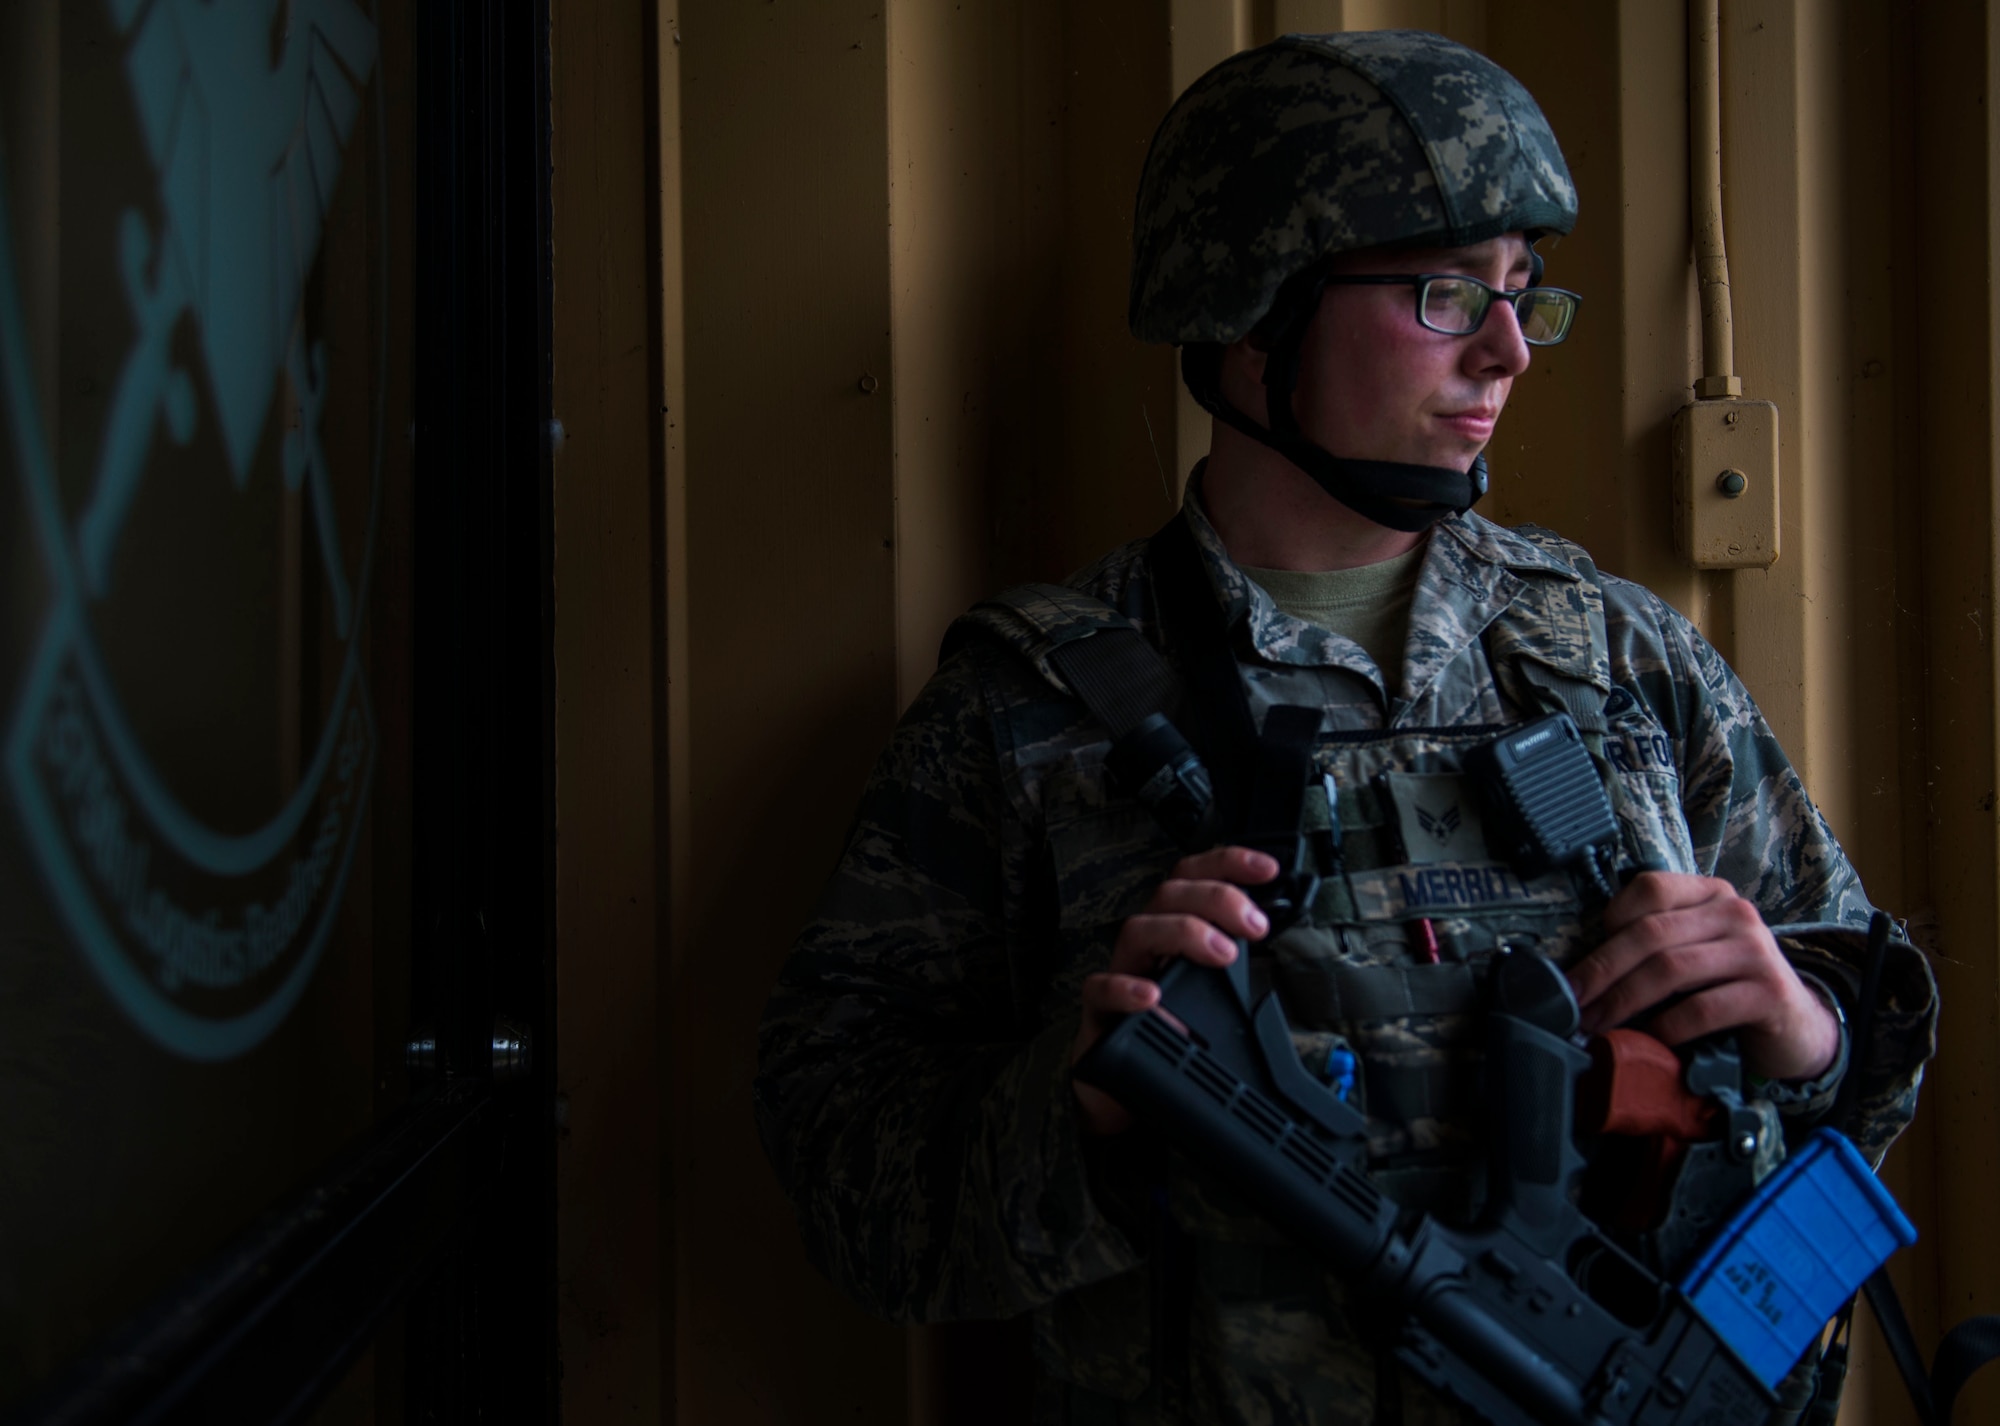 Senior Airman Wade Merritt, 375th Security Forces Squadron, listens to a brief during an active shooter exercise, Scott Air Force Base, Ill., Sept. 9, 2016.  With an increase of mass shootings, the Department of Defense has trained personnel and first responders on how to respond in an active shooter situation.